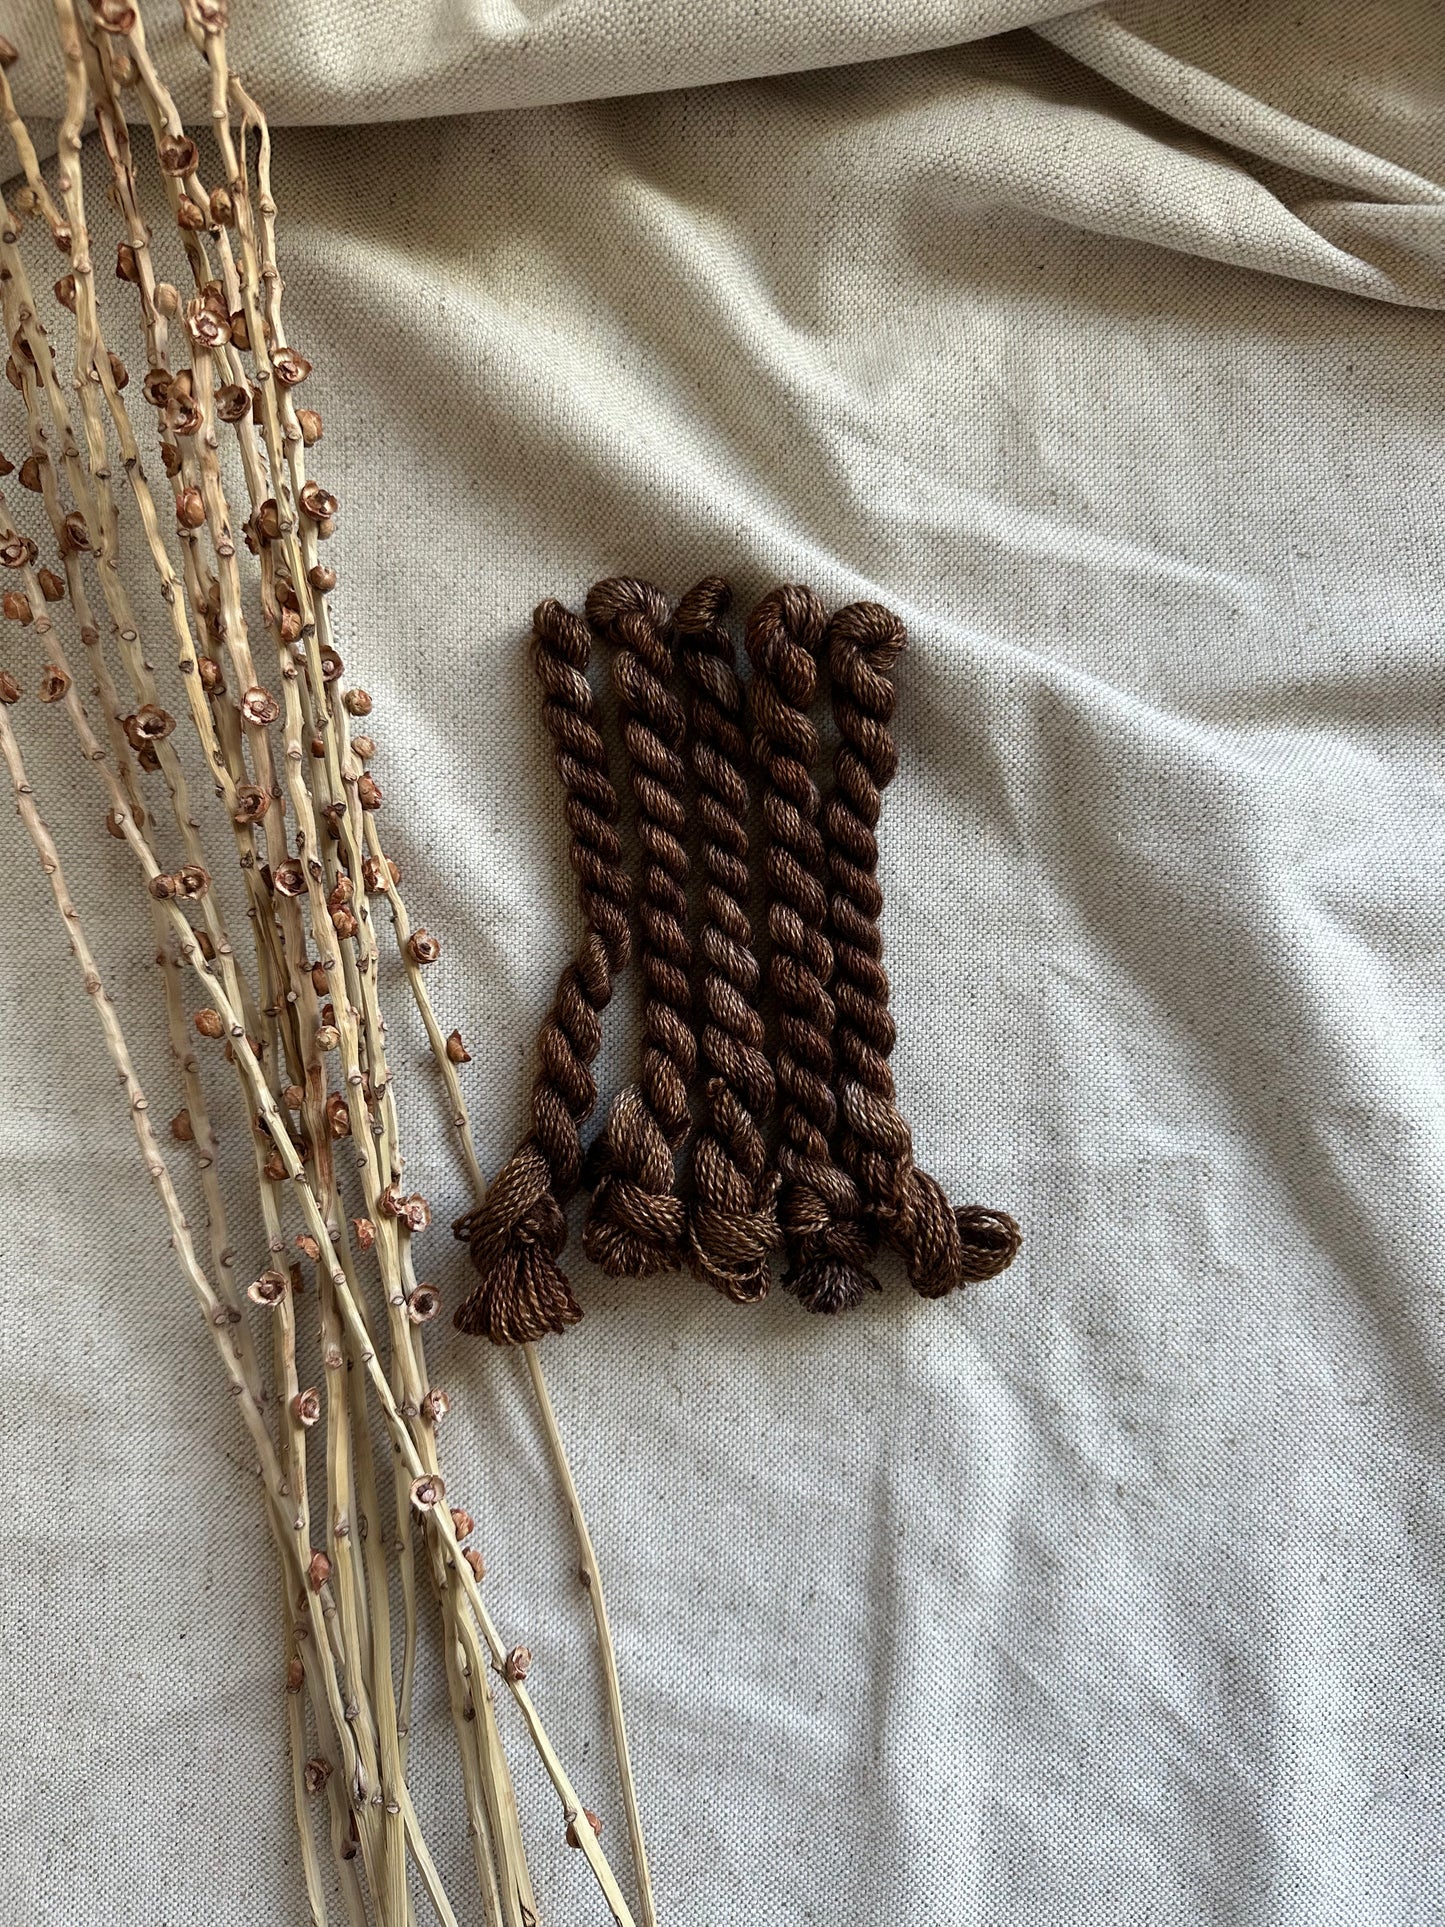 Shades of Brown Embroidery Thread